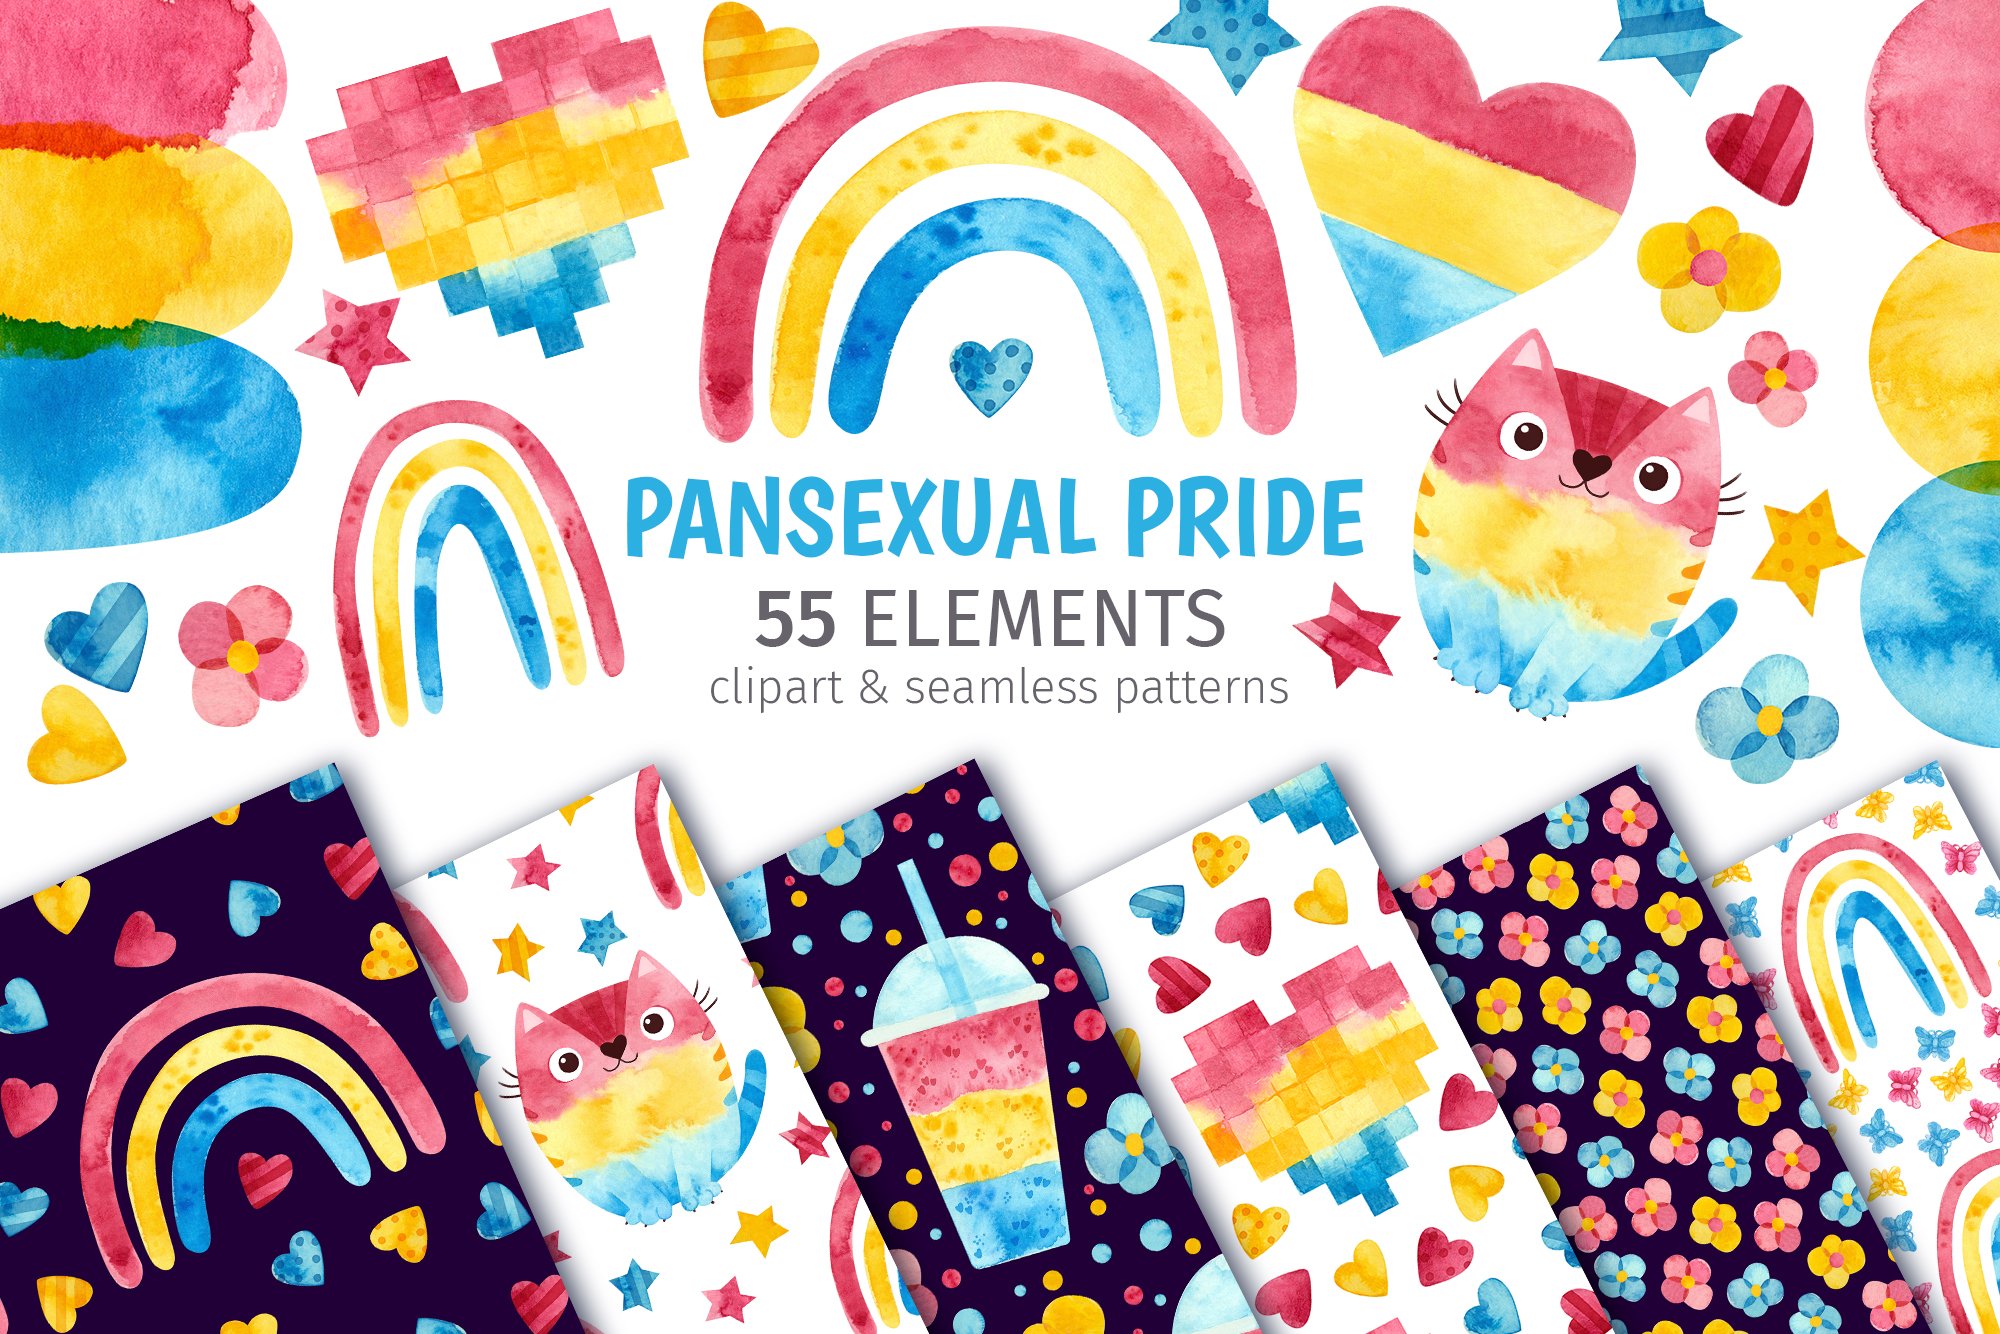 Pansexual pride clipart & patterns cover image.